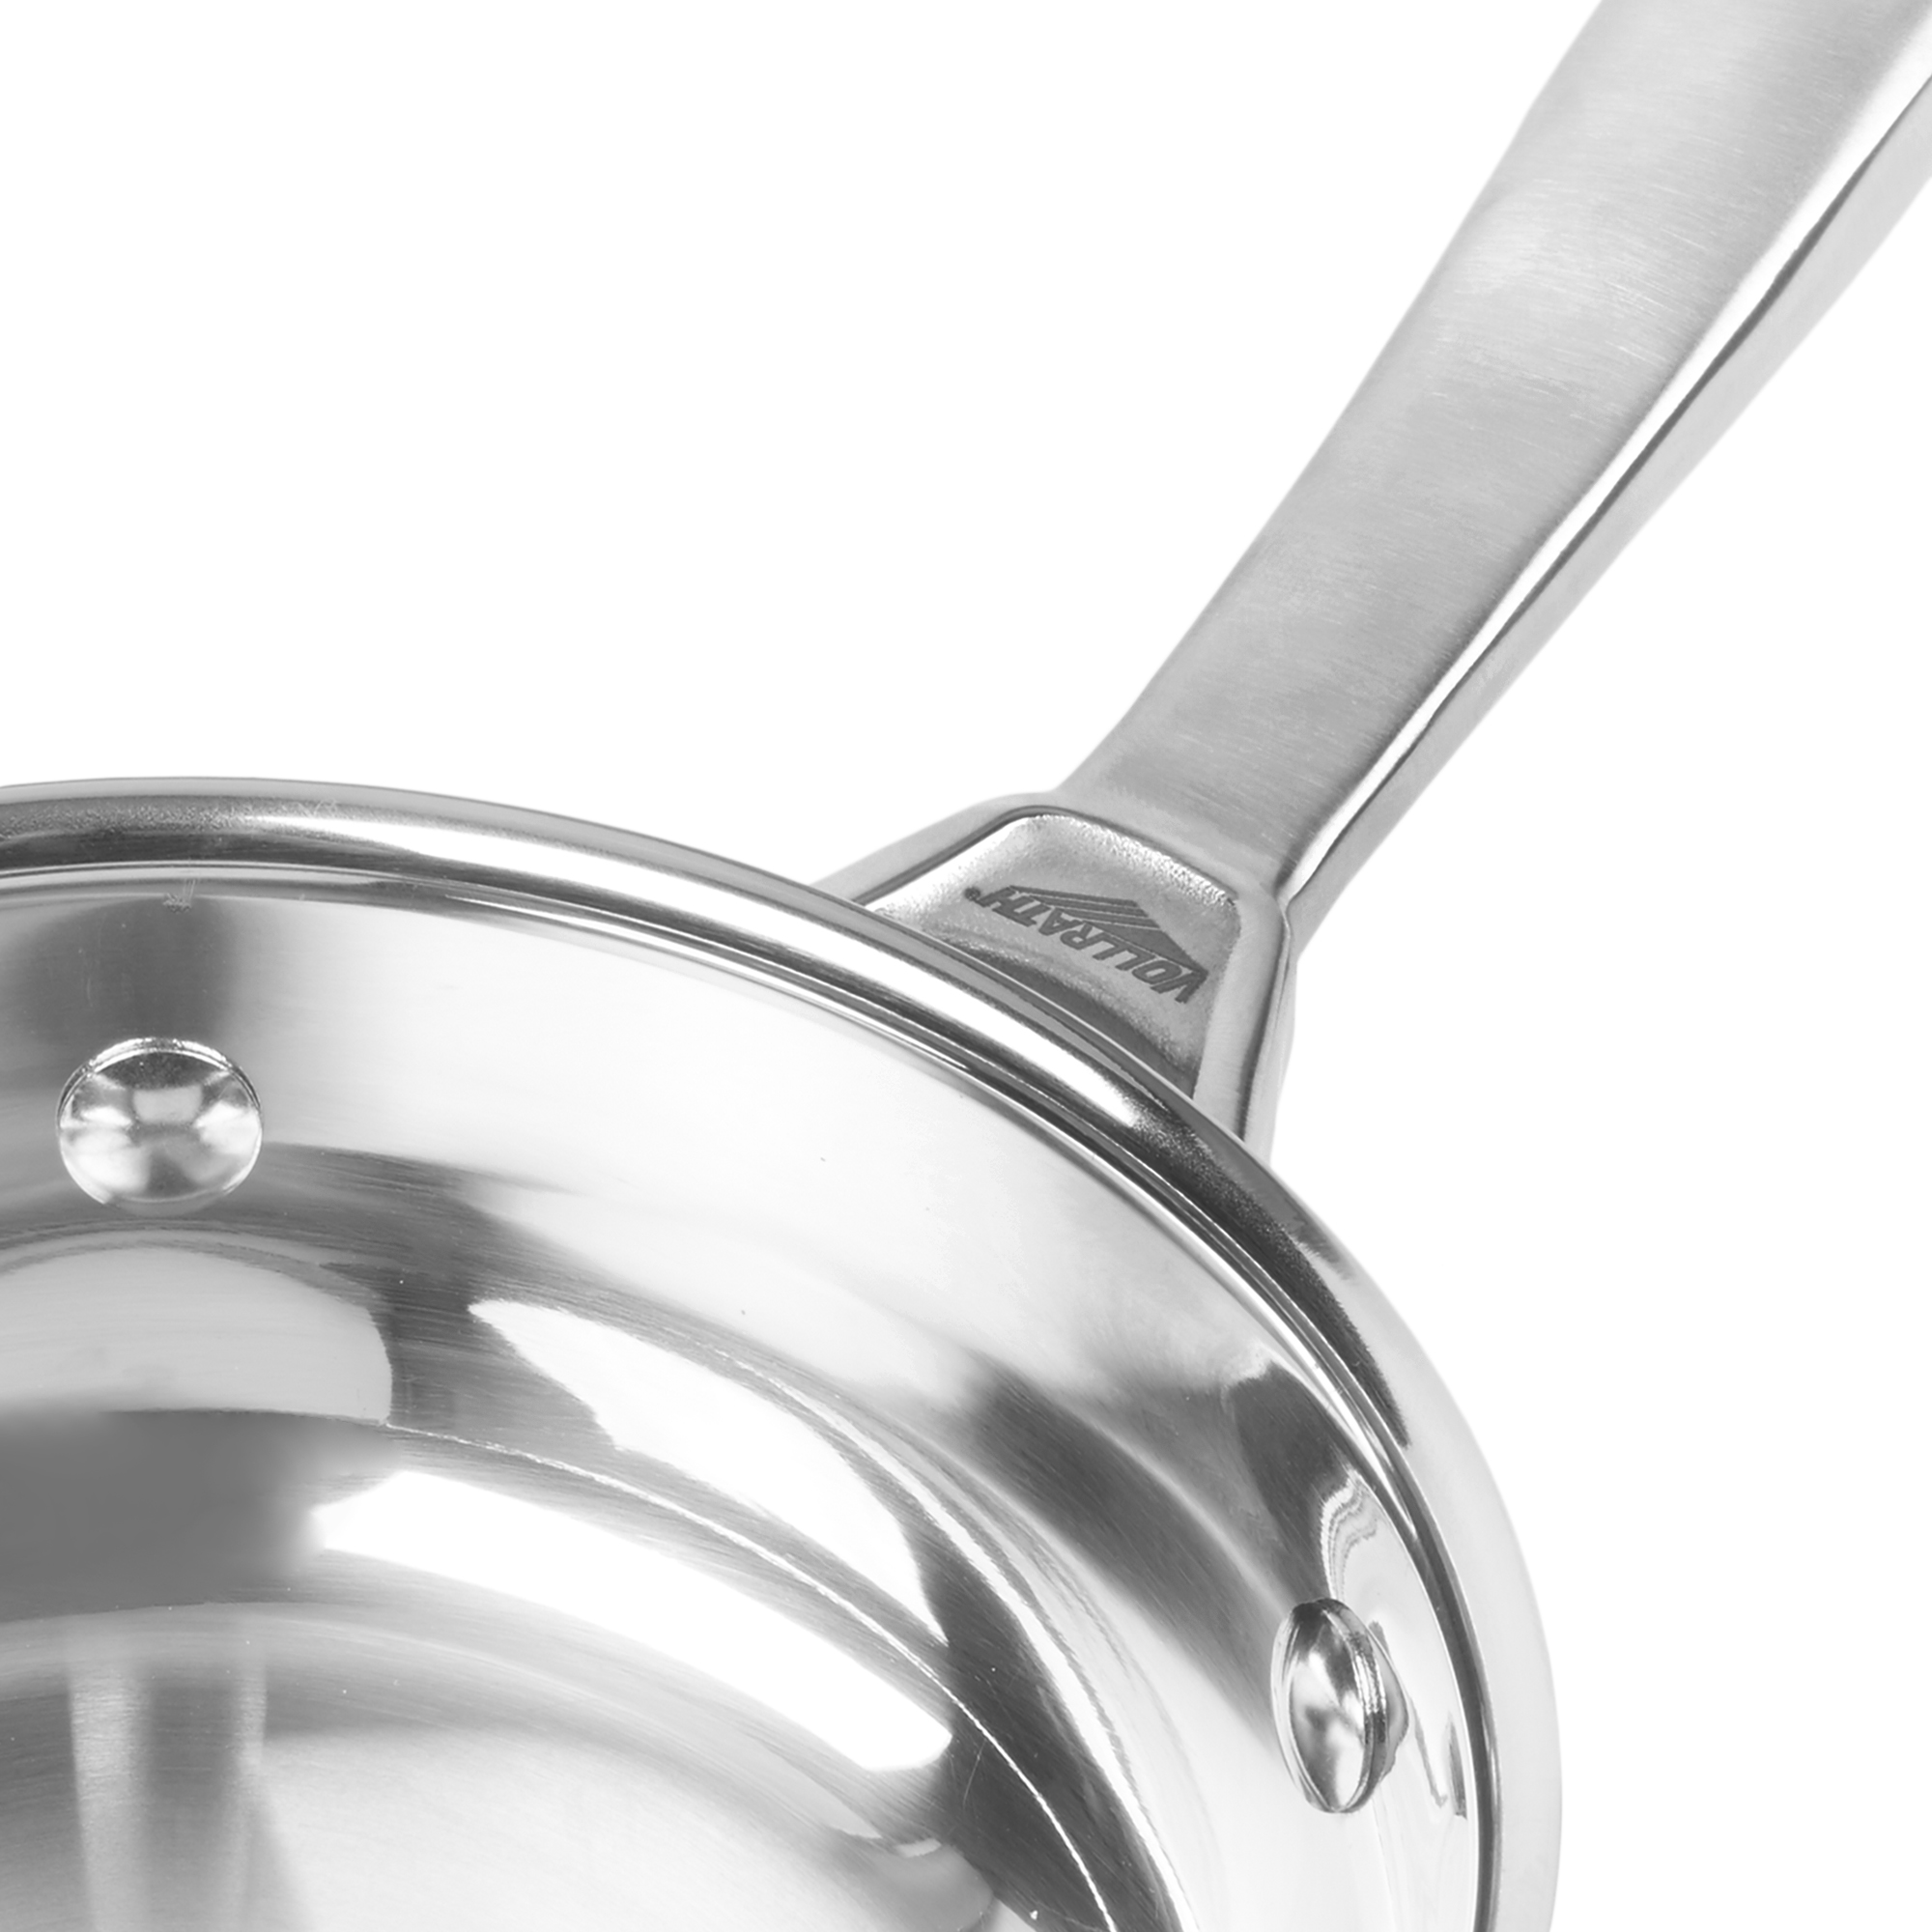 1-quart Intrigue® stainless steel saucier in mirror finish